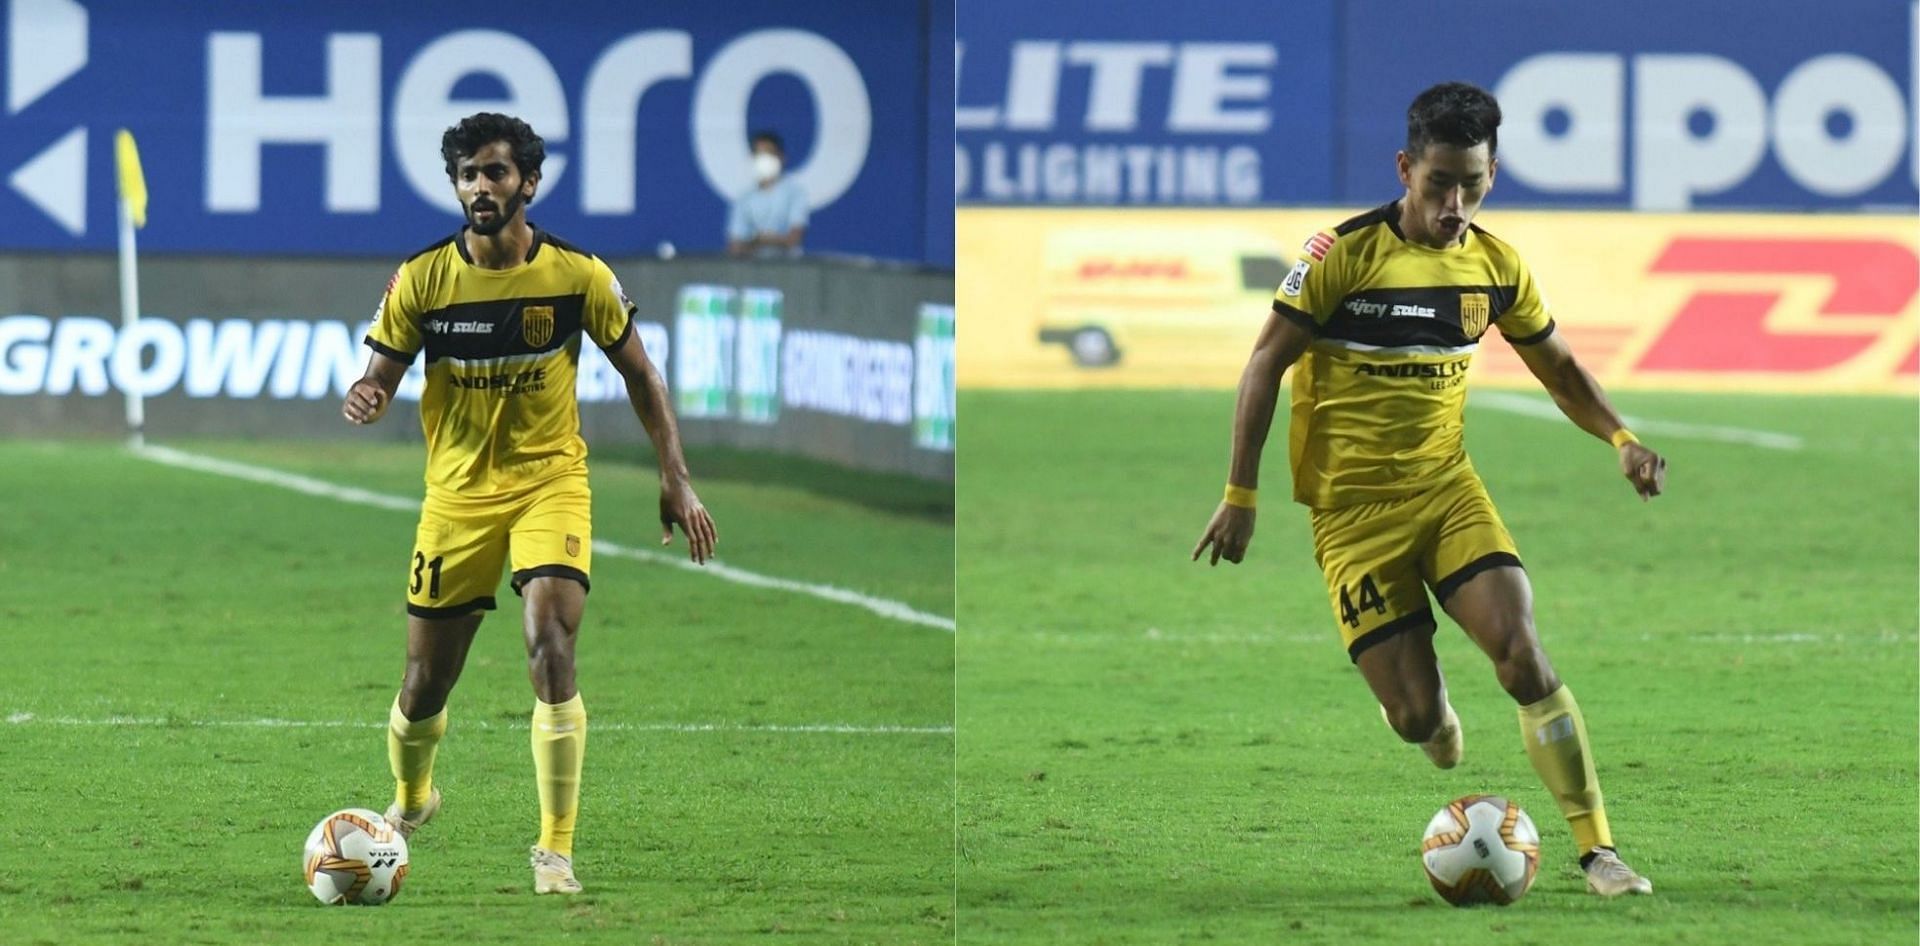 Akash Mishra and Asish Rai are pivotal in the way Hyderabad FC operate. (Image Courtesy: Twitter/HydFCOfficial)